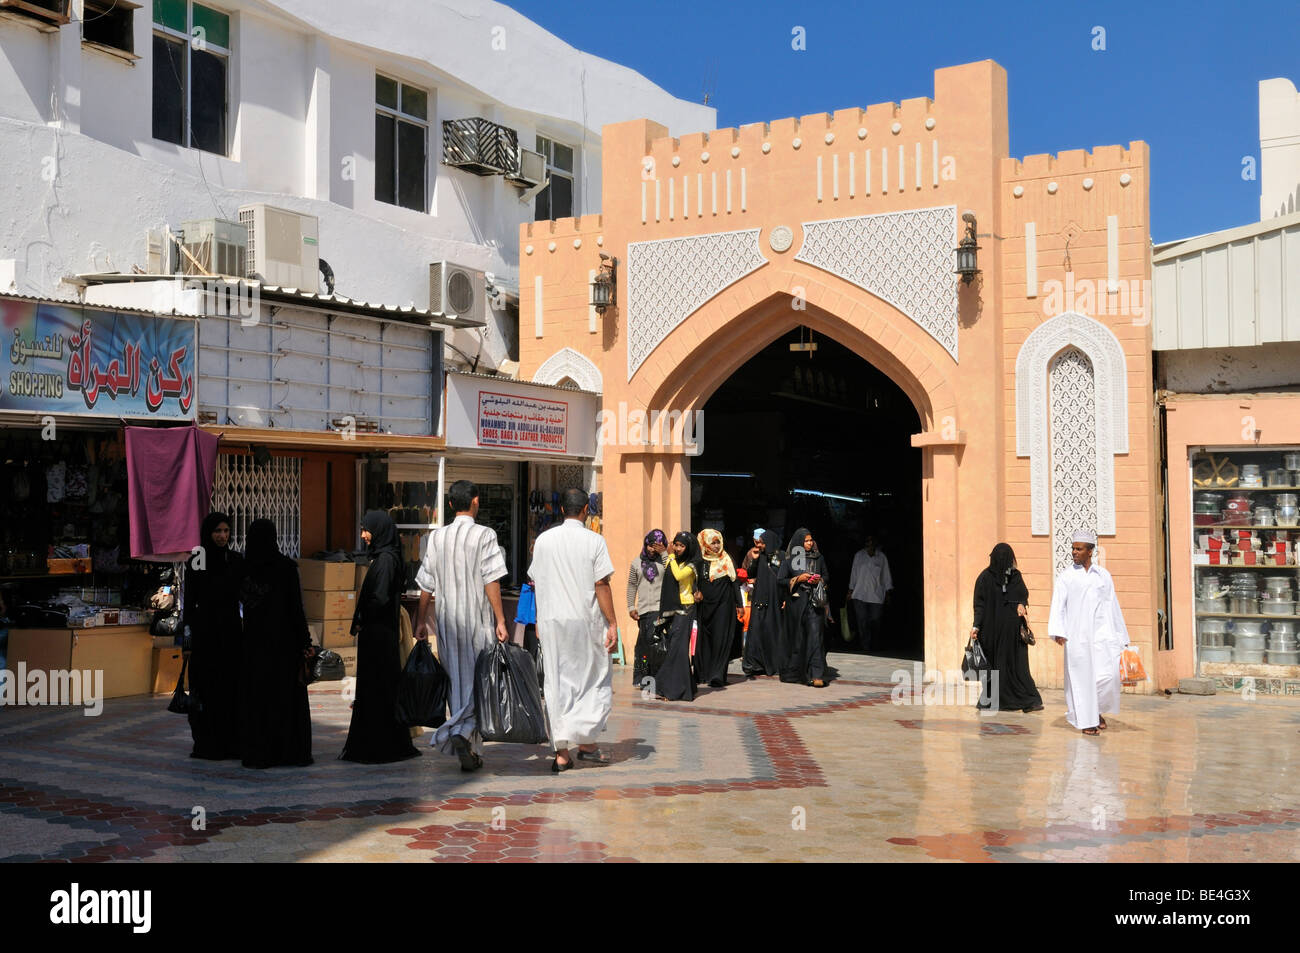 People in front of the entrance to Mutrah Souk, Muscat, Sultanate of Oman, Arabia, Middle East Stock Photo